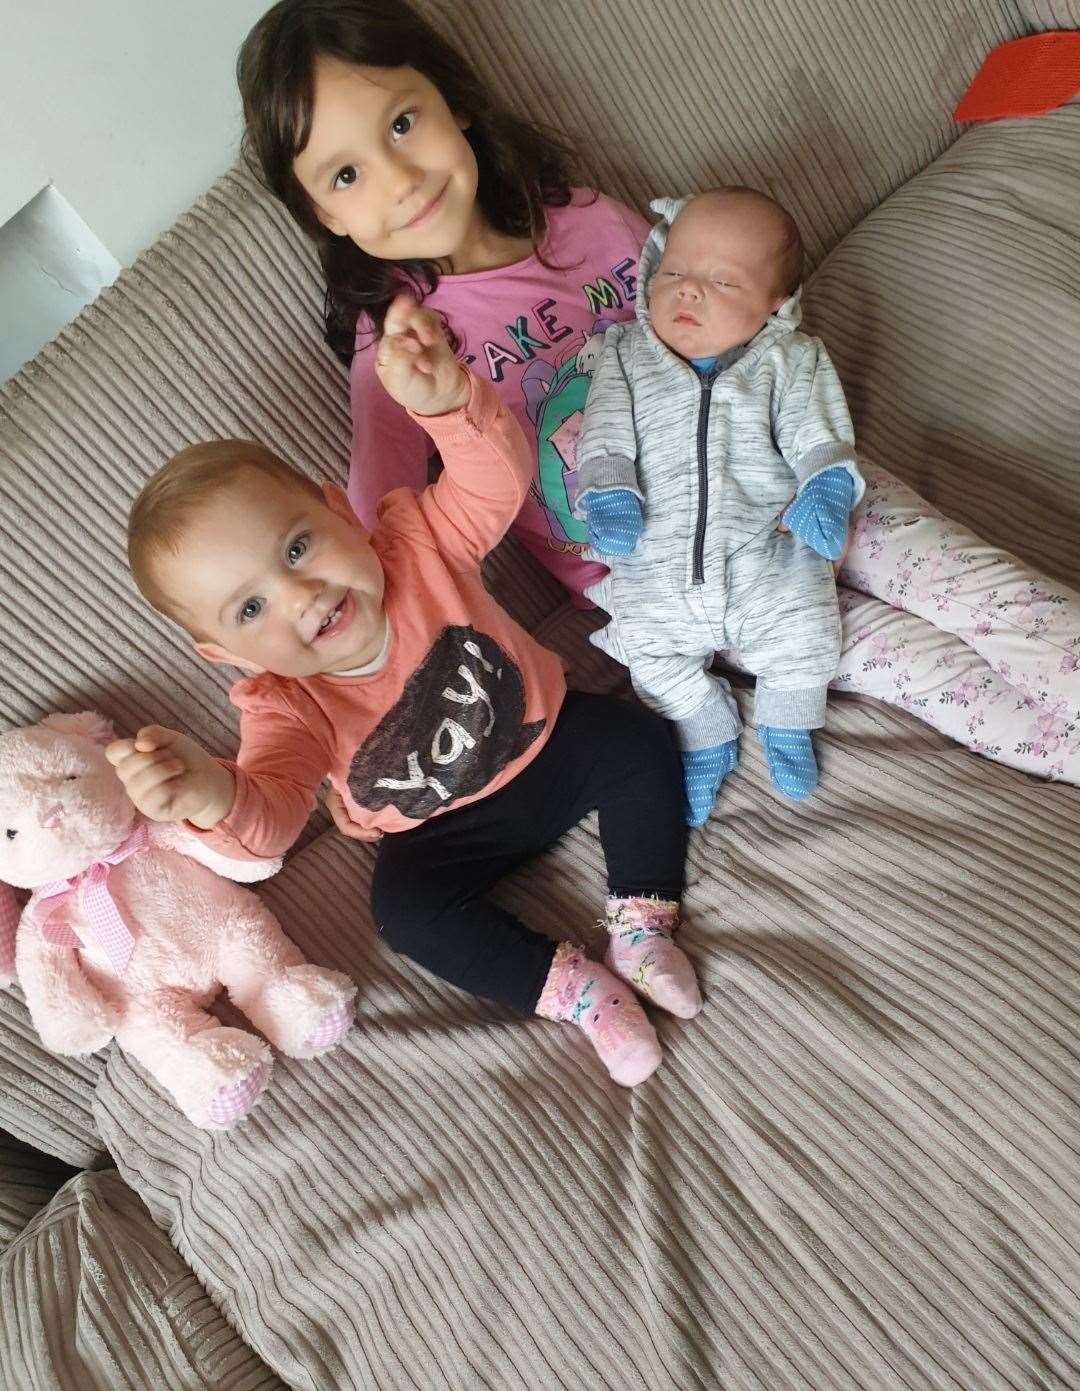 Sisters Anna-Karina and Anna-Karla cuddle up with their new baby brother Alexandru-Loachim Dutuc at their home in Castle Street, Queenborough